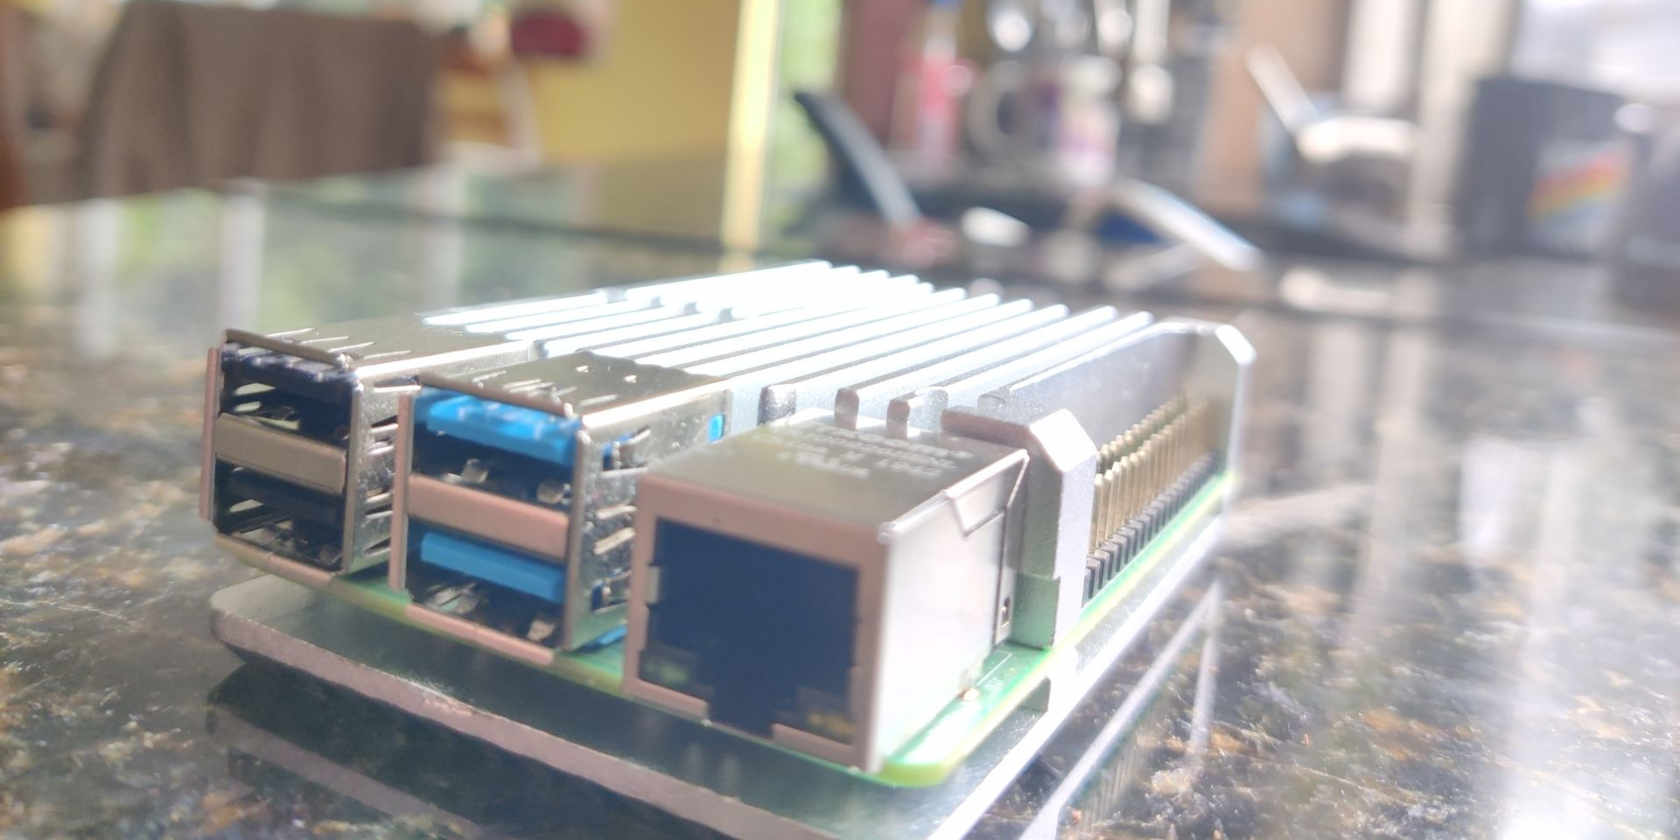 A raspberry Pi in metallic silver passive cooled cased on a granite kitchen worktop